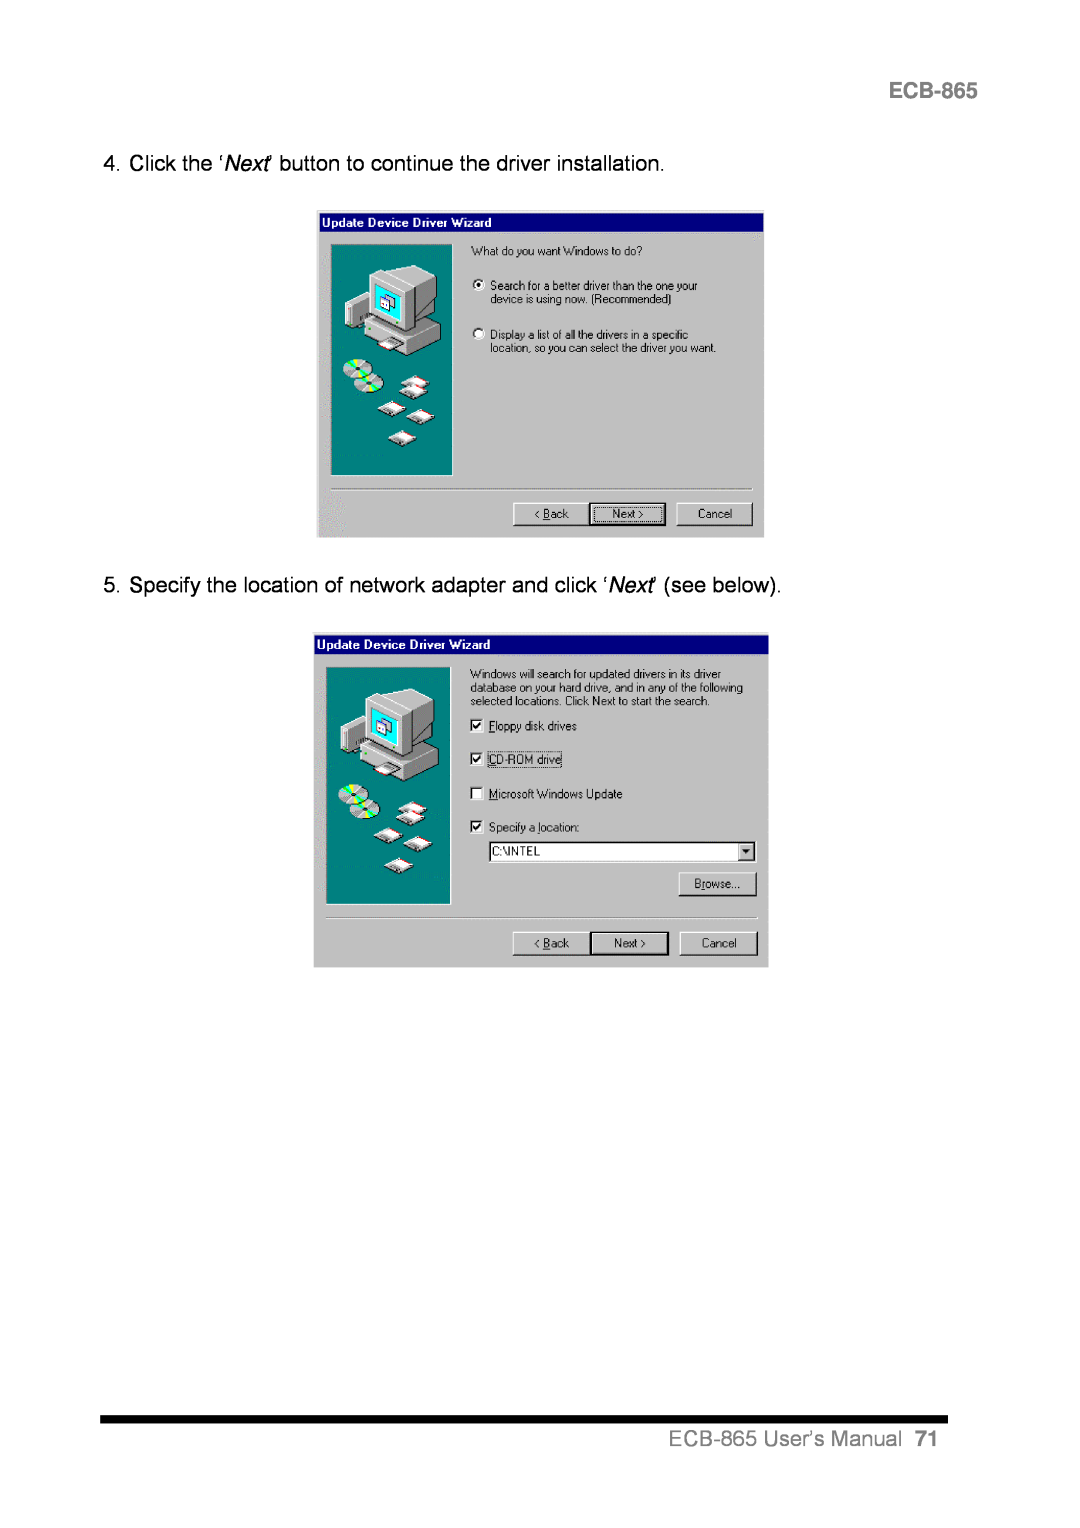 Intel user manual Click the ‘Next’ button to continue the driver installation, ECB-865User’s Manual 